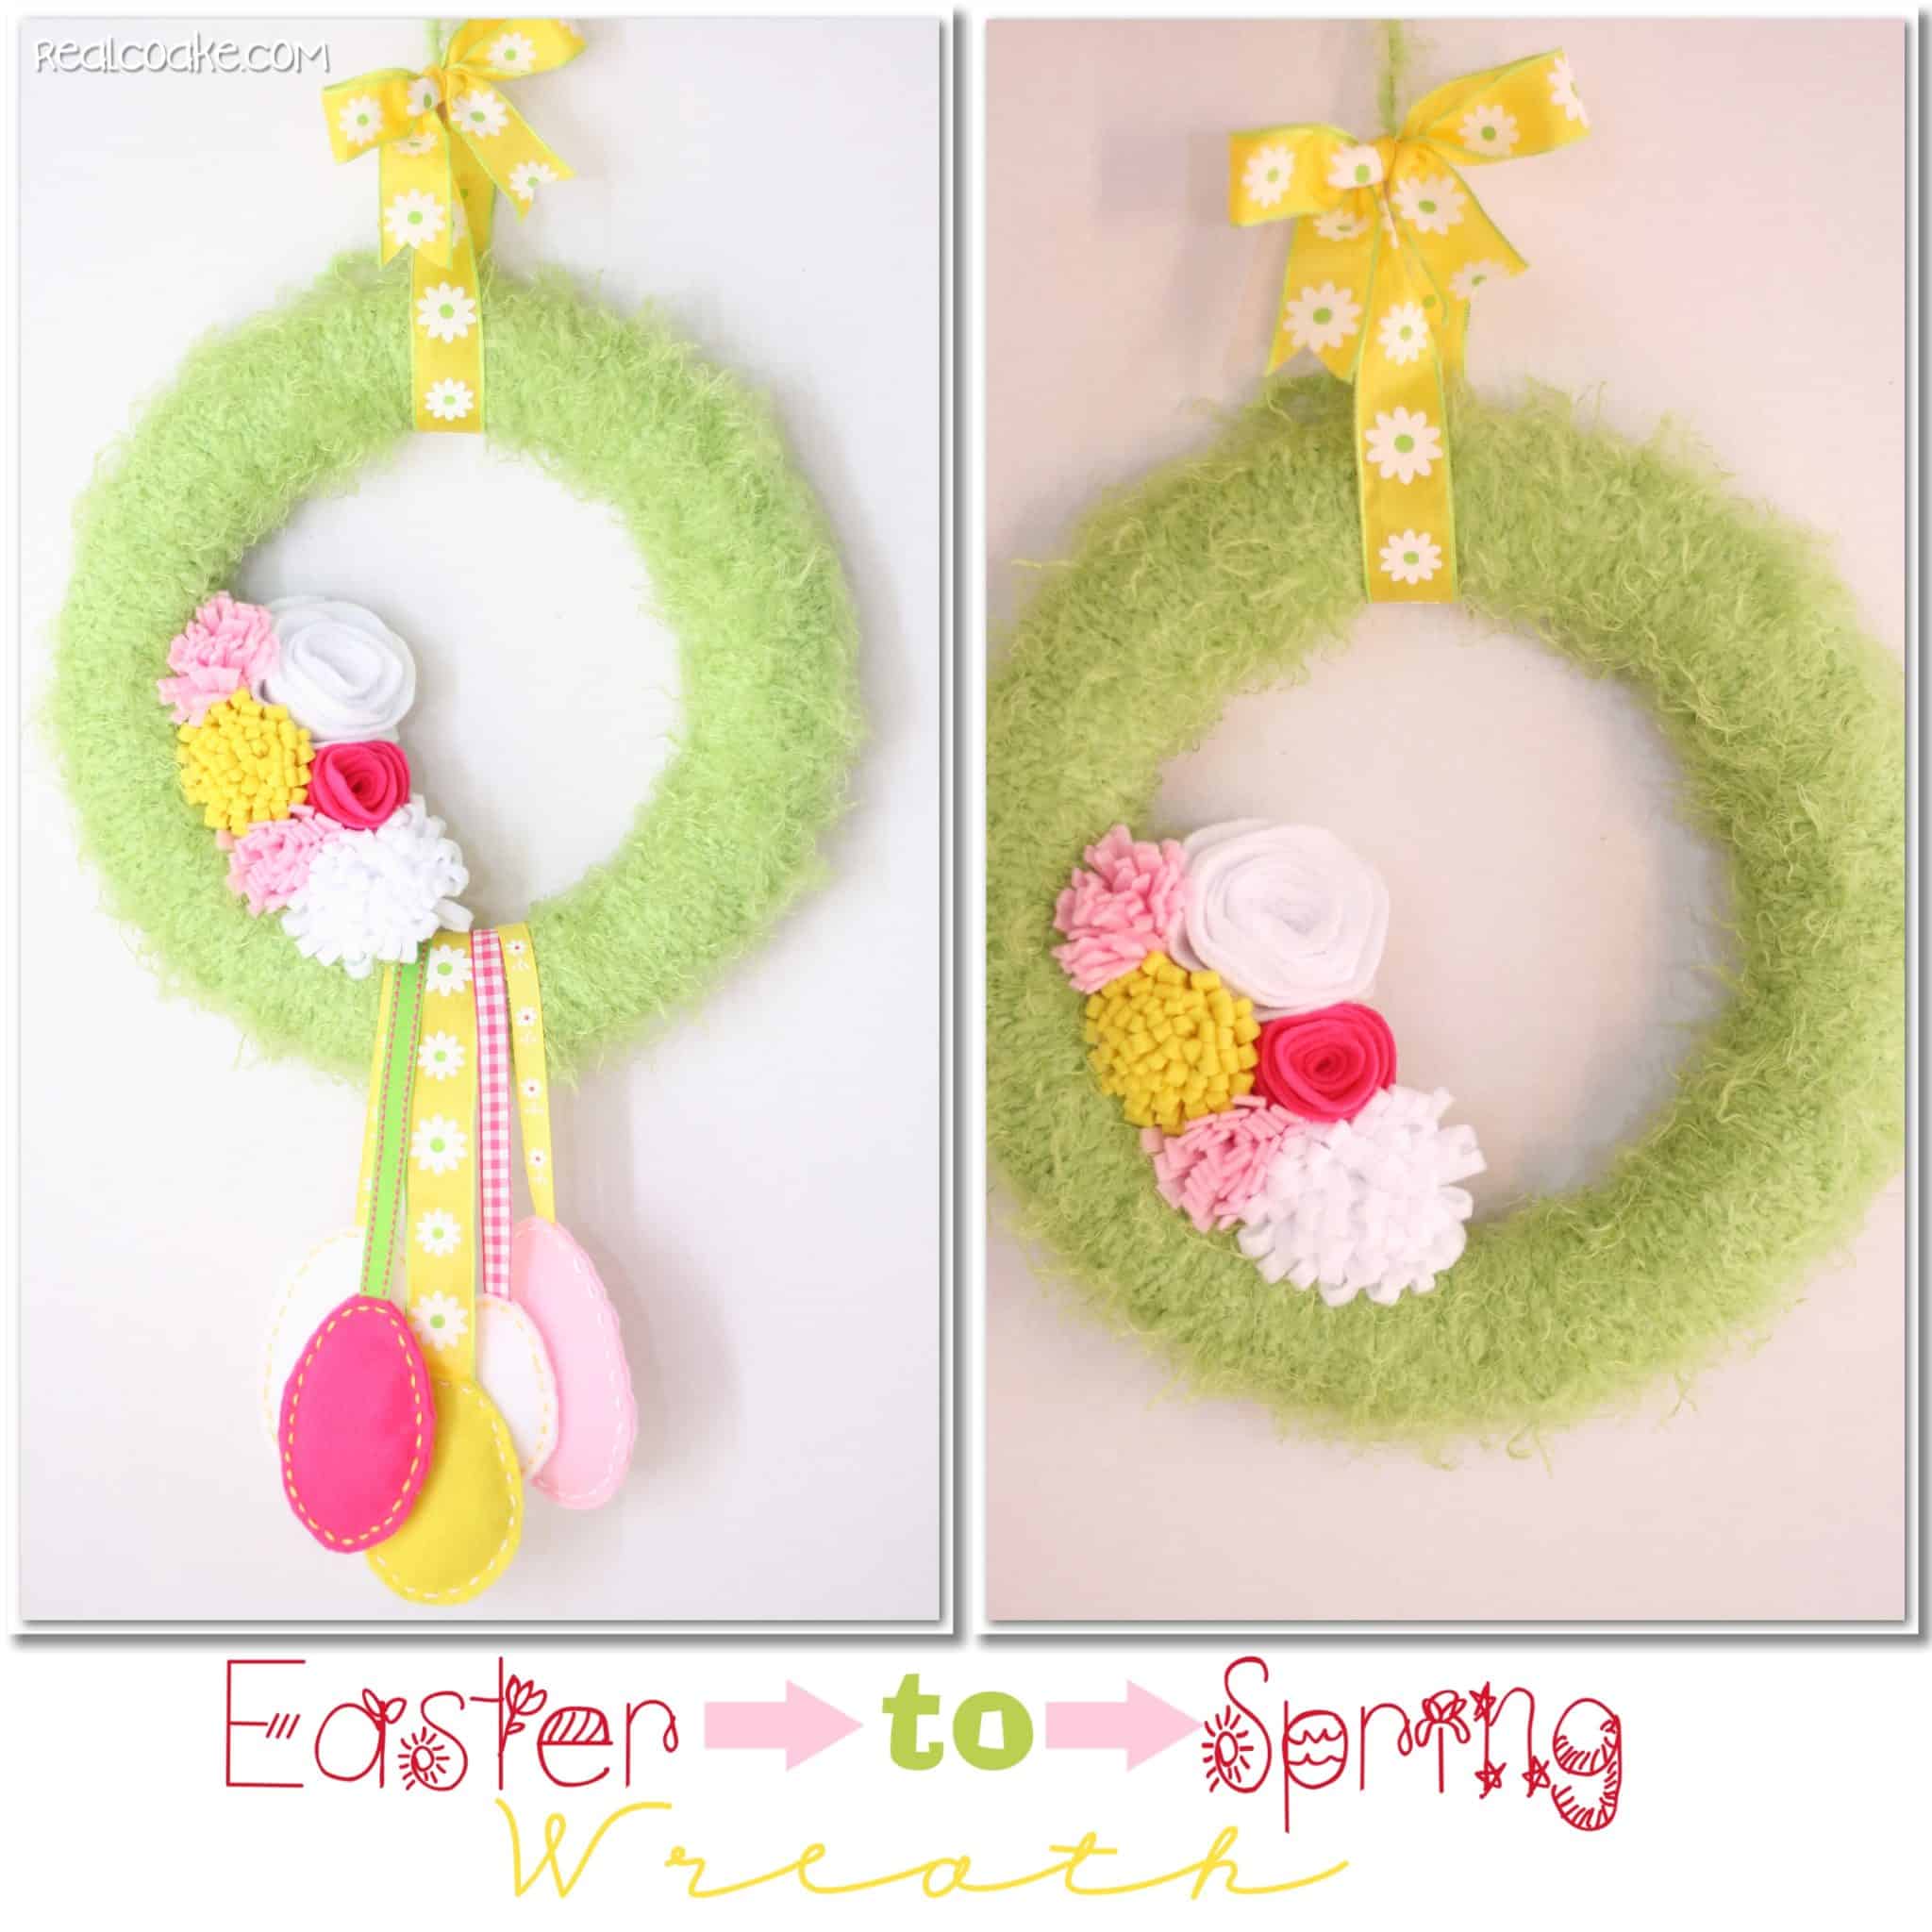 DIY wreath that is easy to change from Easter to spring yarn wrapped wreath #Easter #decorating #wreath